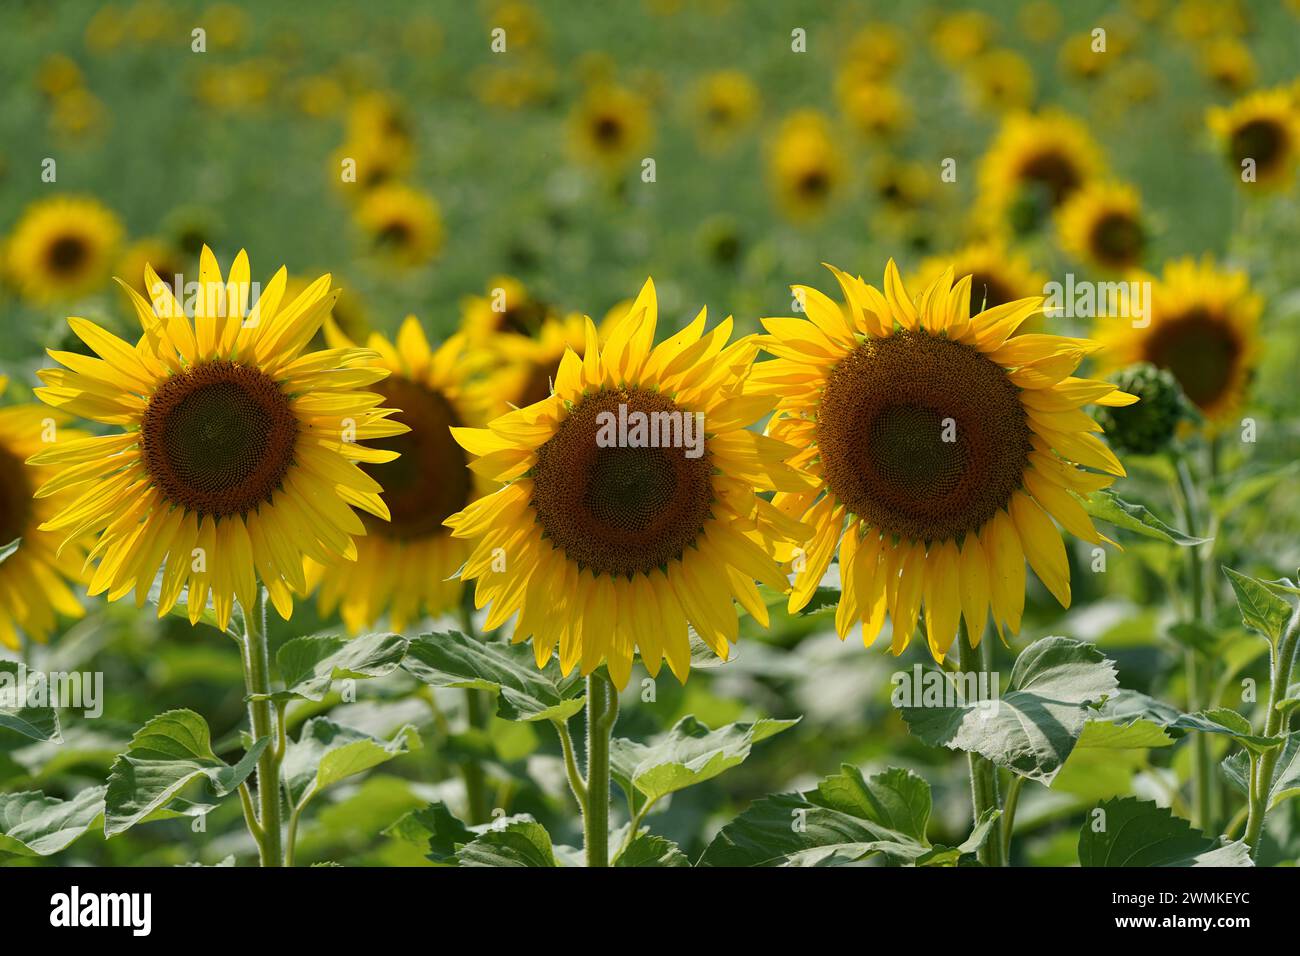 Sunflowers stand tall in a row in a field in bloom on a sunny day Stock Photo